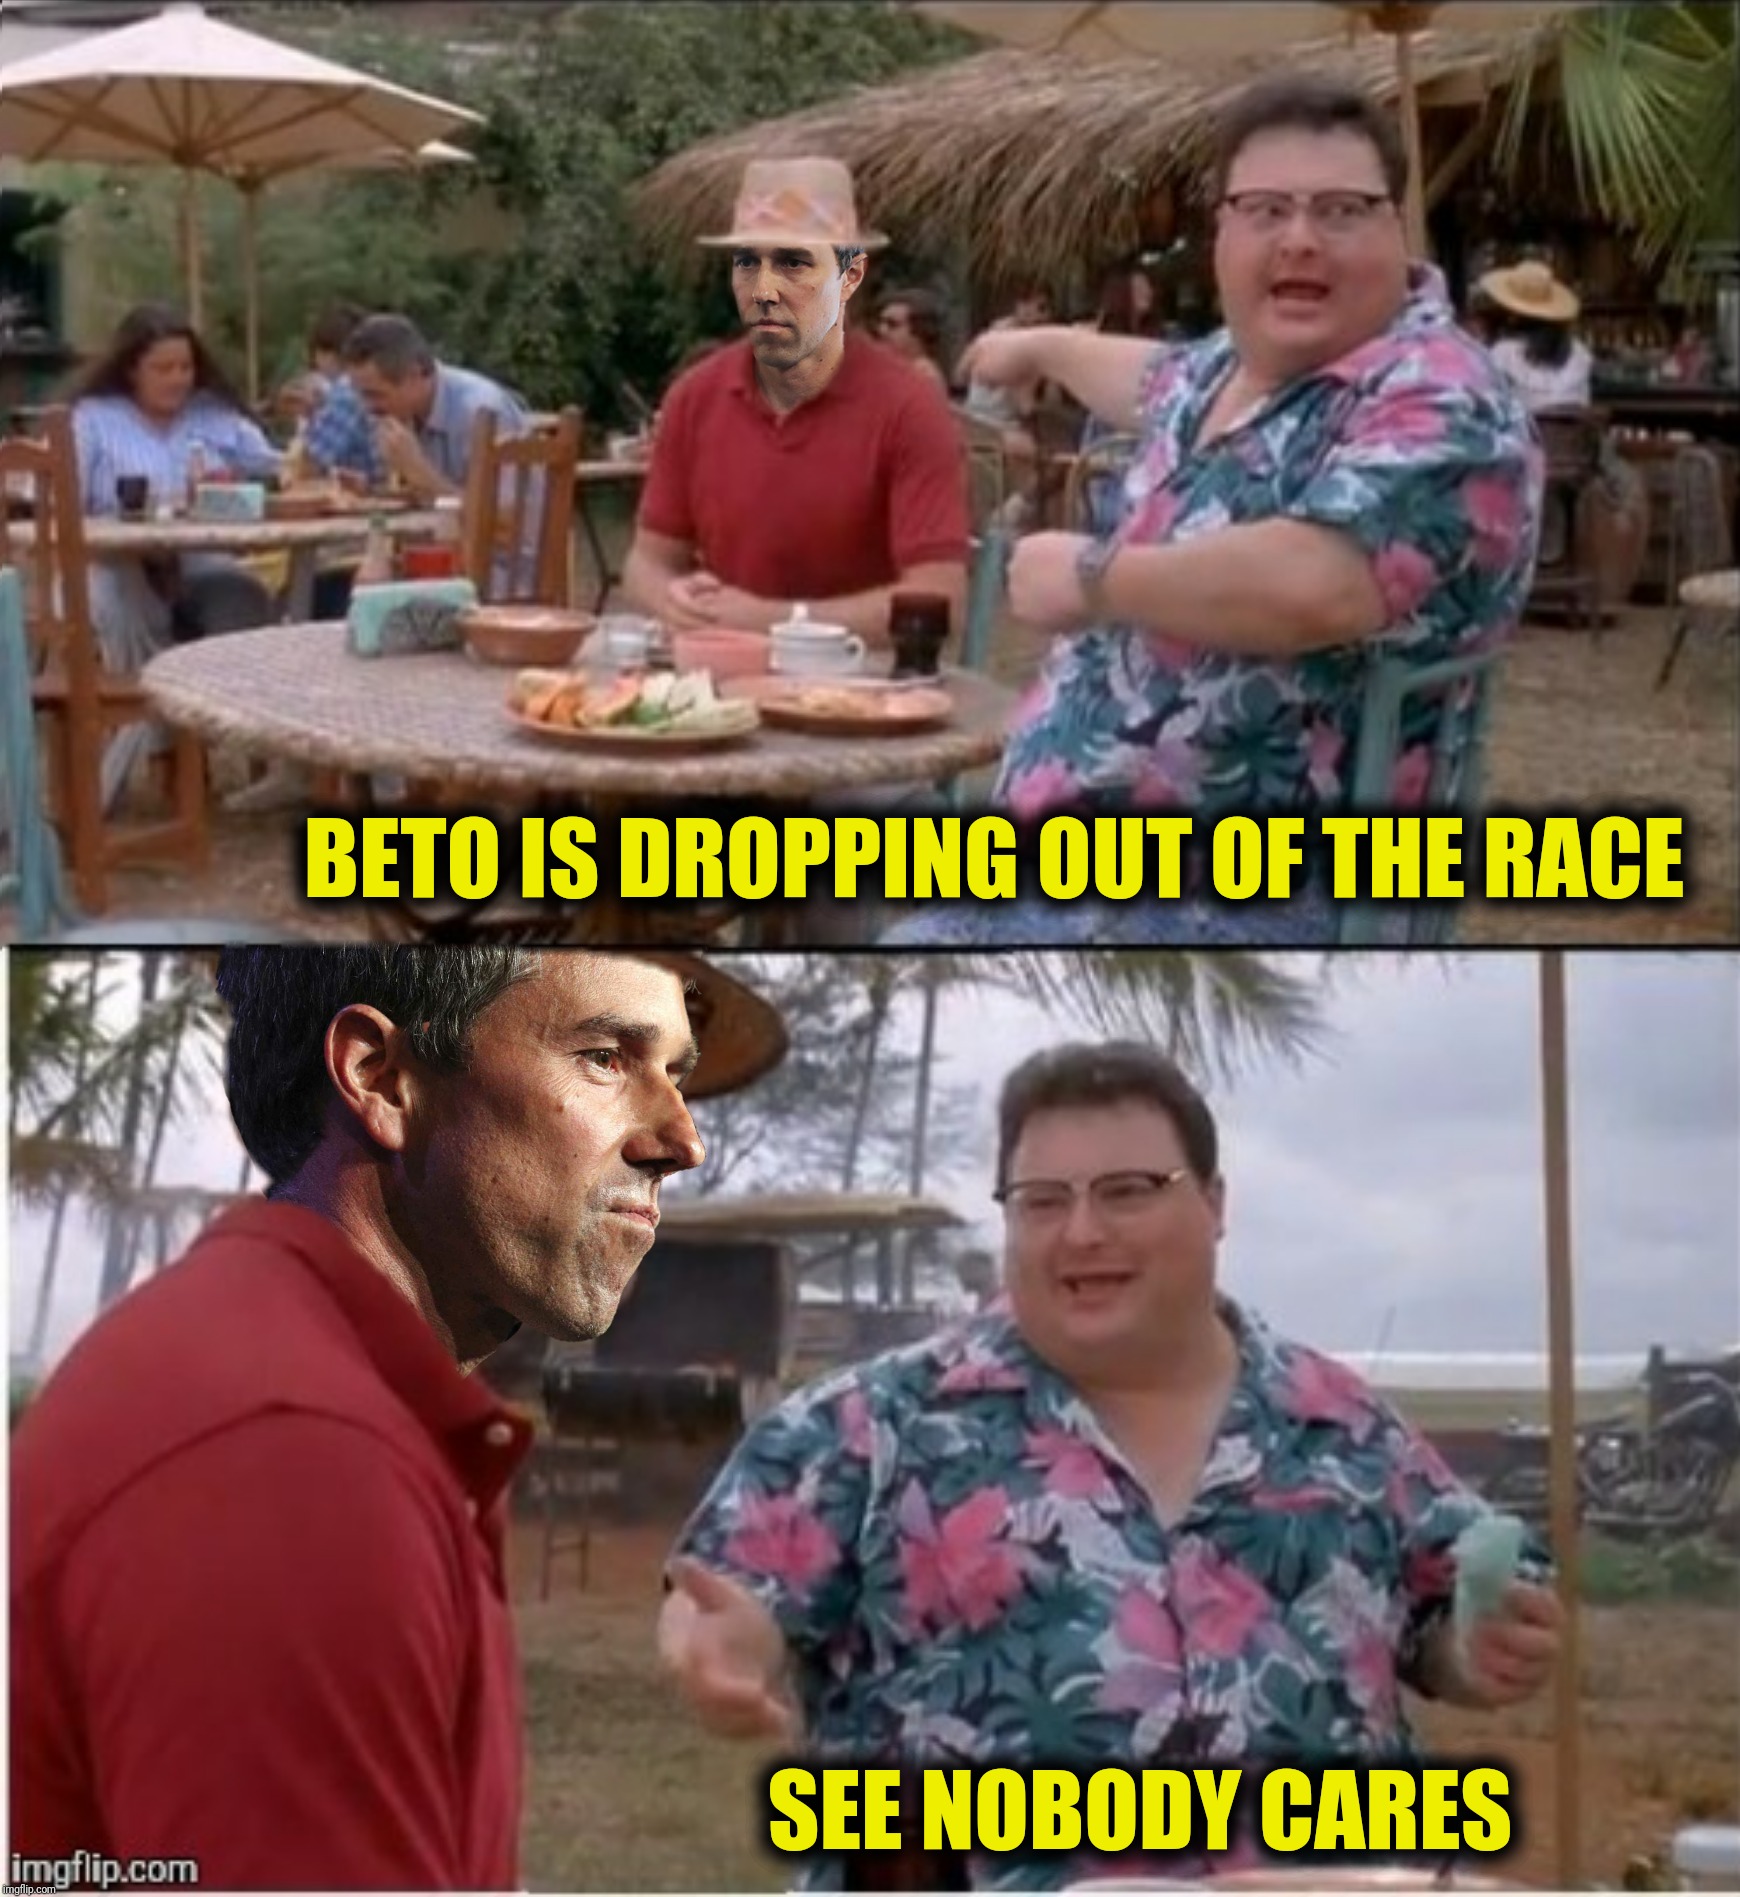 The face you make when losing becomes a way of life | BETO IS DROPPING OUT OF THE RACE; SEE NOBODY CARES | image tagged in beto o'rourke,see nobody cares,election 2020 | made w/ Imgflip meme maker